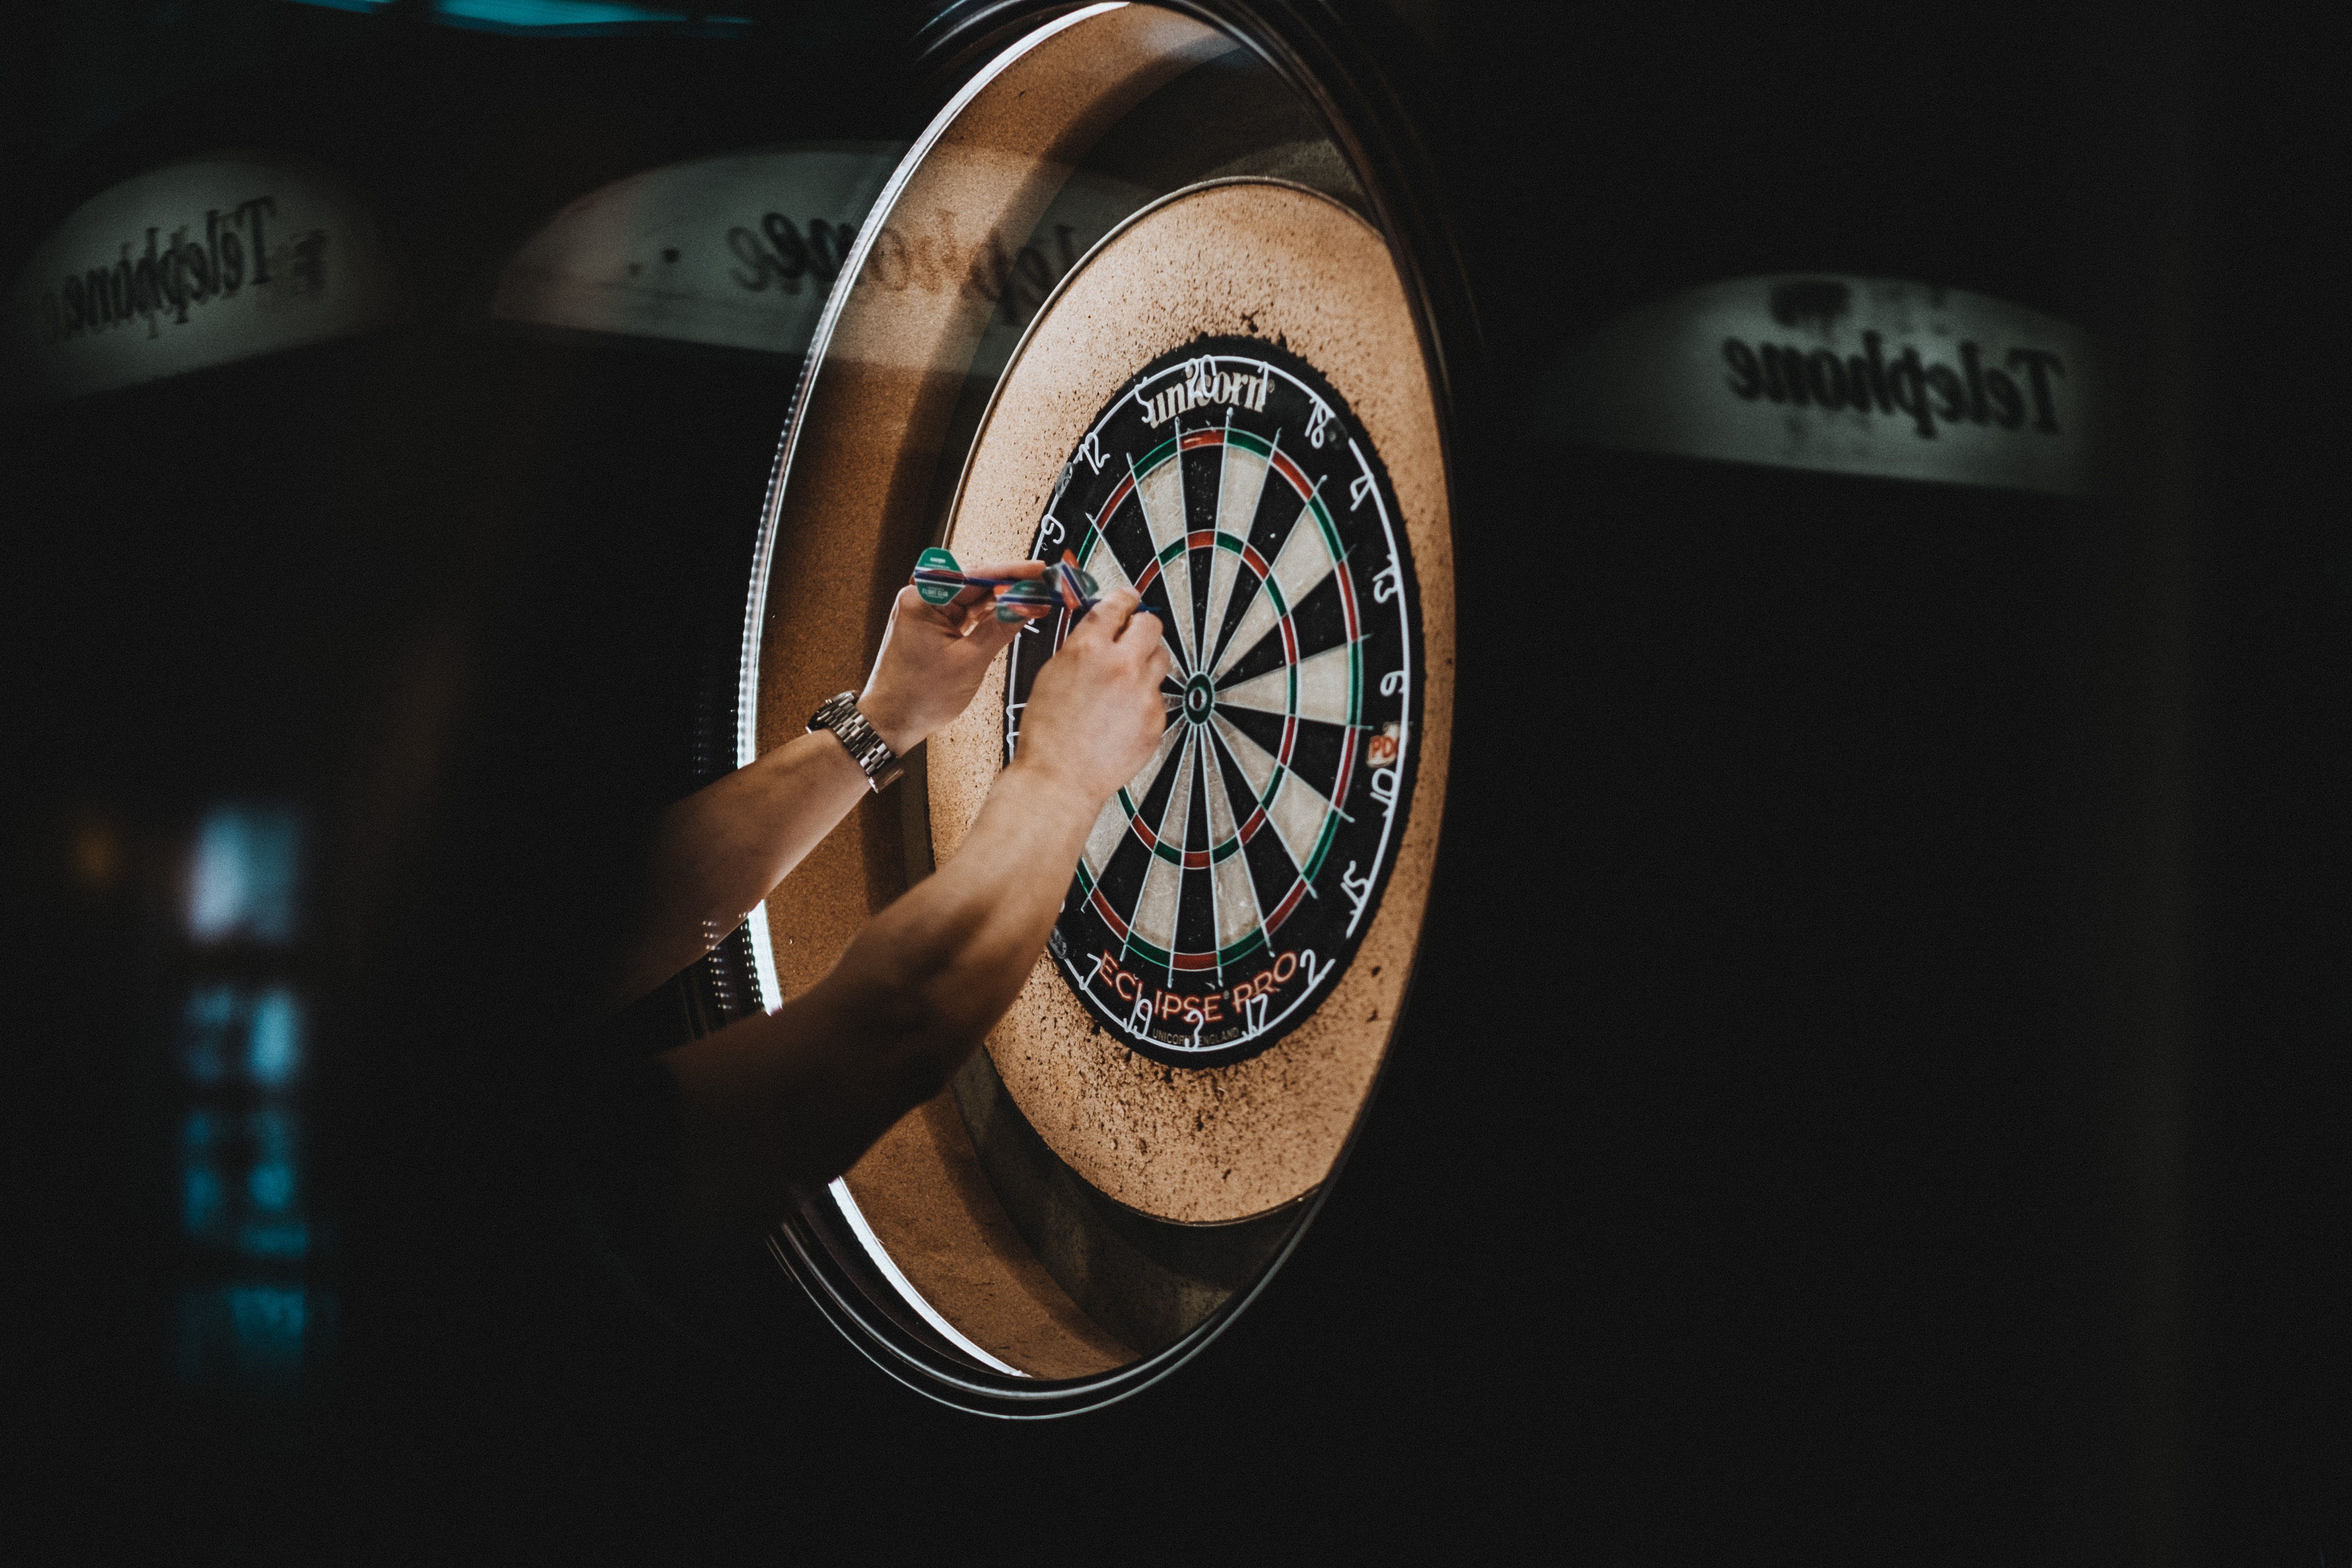 5400x3600 #darts, #background, #sport, #circle, #hand, #wallpaper, #play, #watch, #reflection, #arm, #game, #fun, #night, #typography, #light, #dartboard, #Creative Commons image, #fashion, #evening, #telephone box, #hands. Mocah.org HD